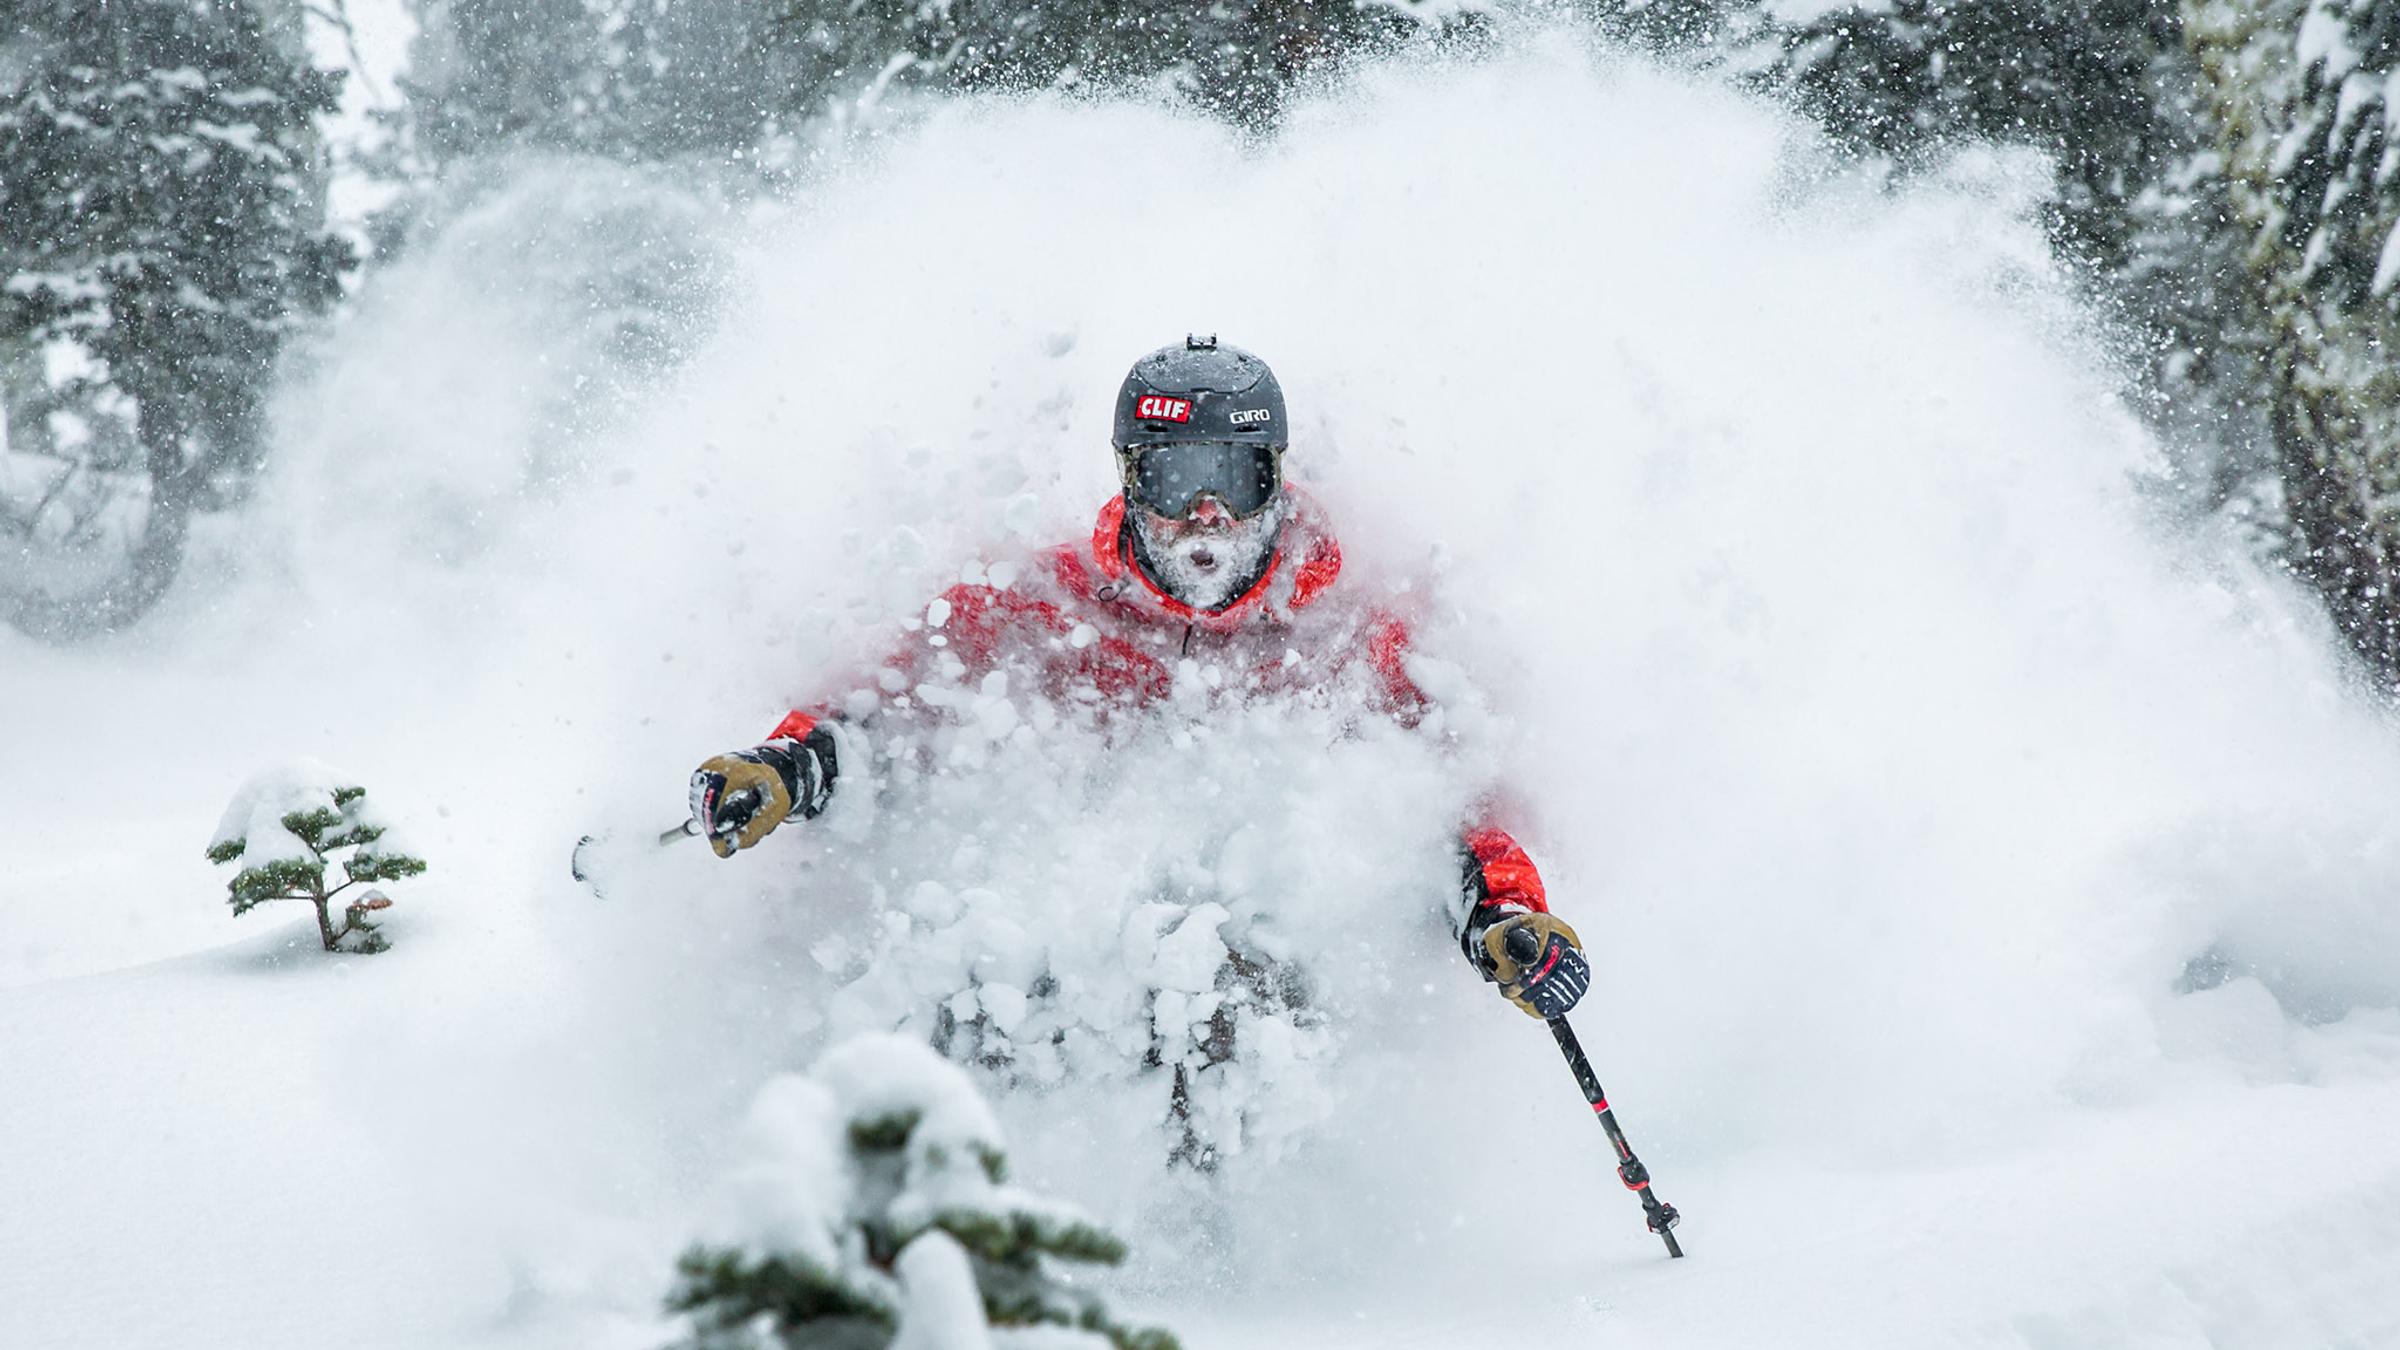 Travis Ganong getting pitted in deep blower powder at squaw valley